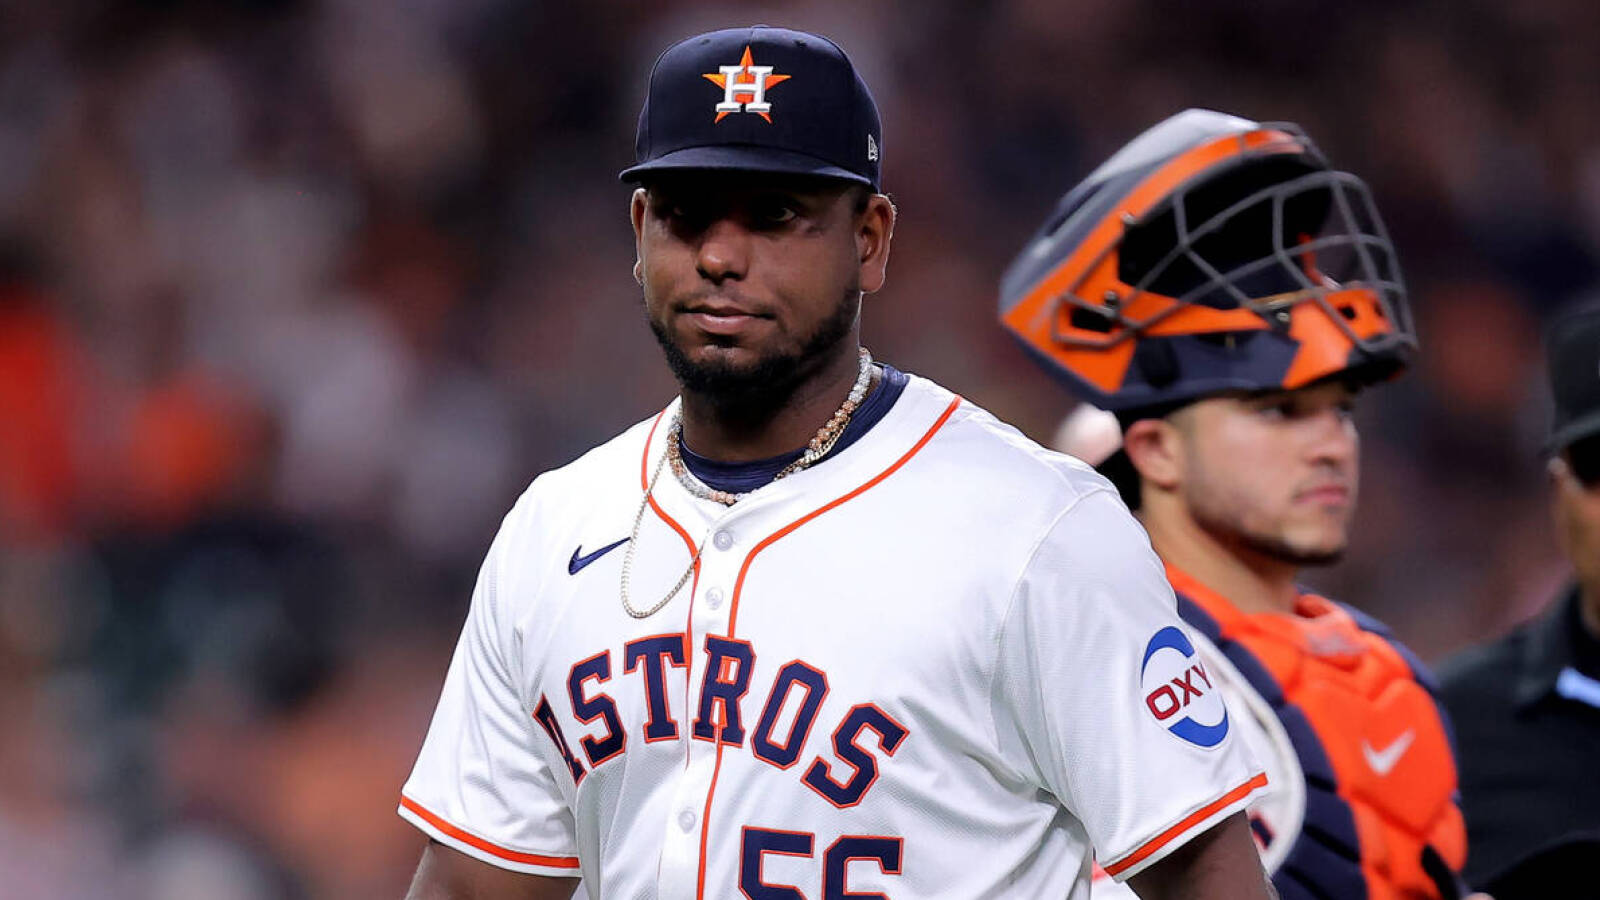 Watch: Astros pitcher ejected after foreign substance check